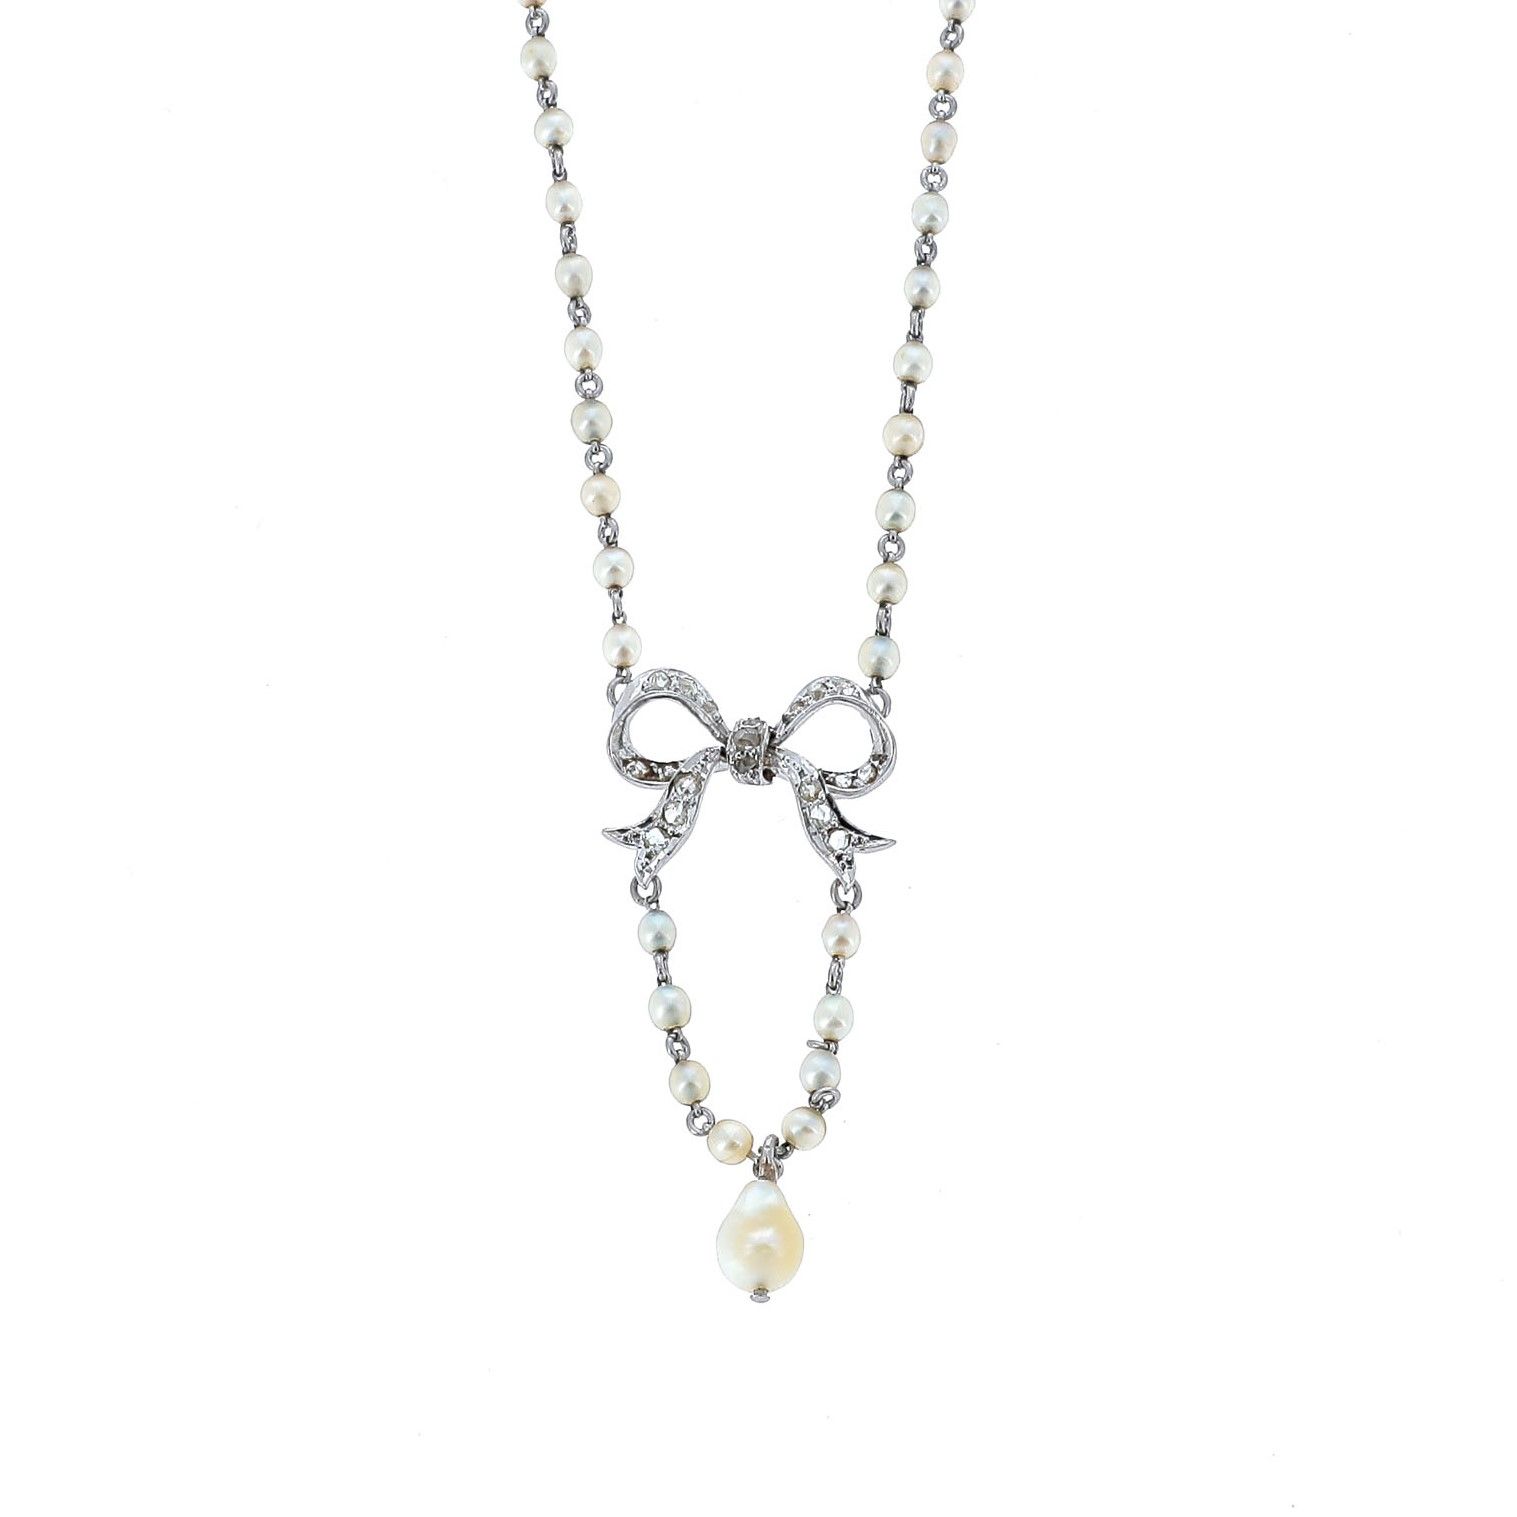 Null NEGLIGEE NECKLACE

white gold chain, punctuated with small seed pearls, hol&hellip;